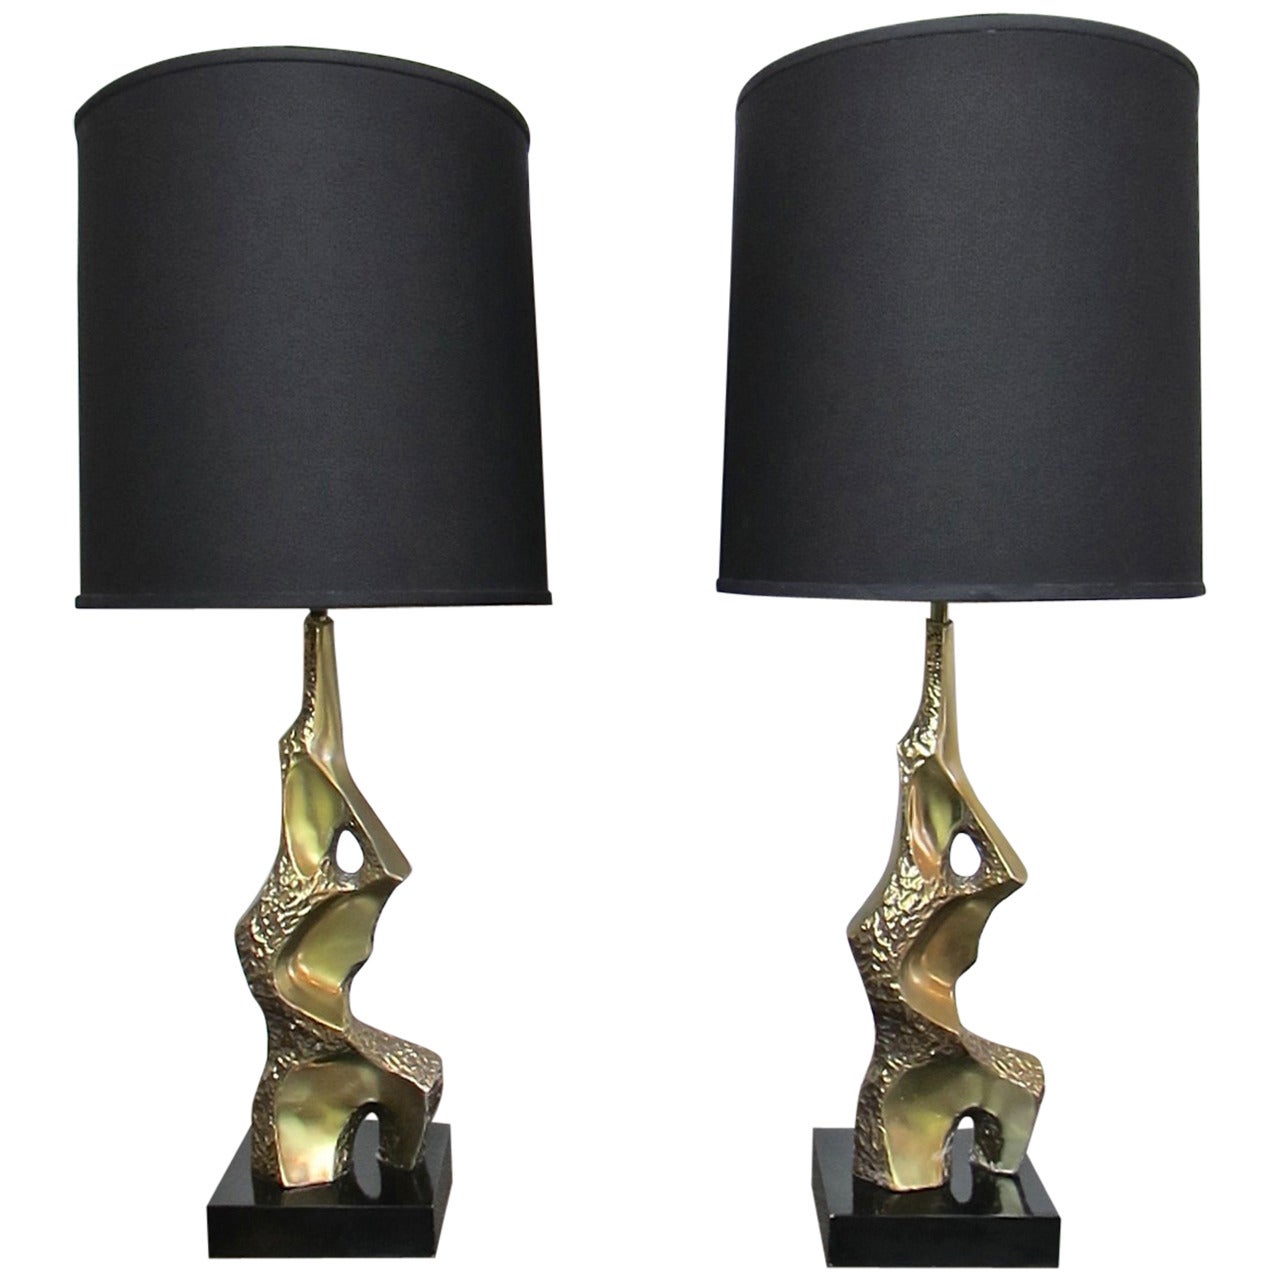 Pair of Brass Brutalist Table Lamps by Maurizio Tempestini for Laurel